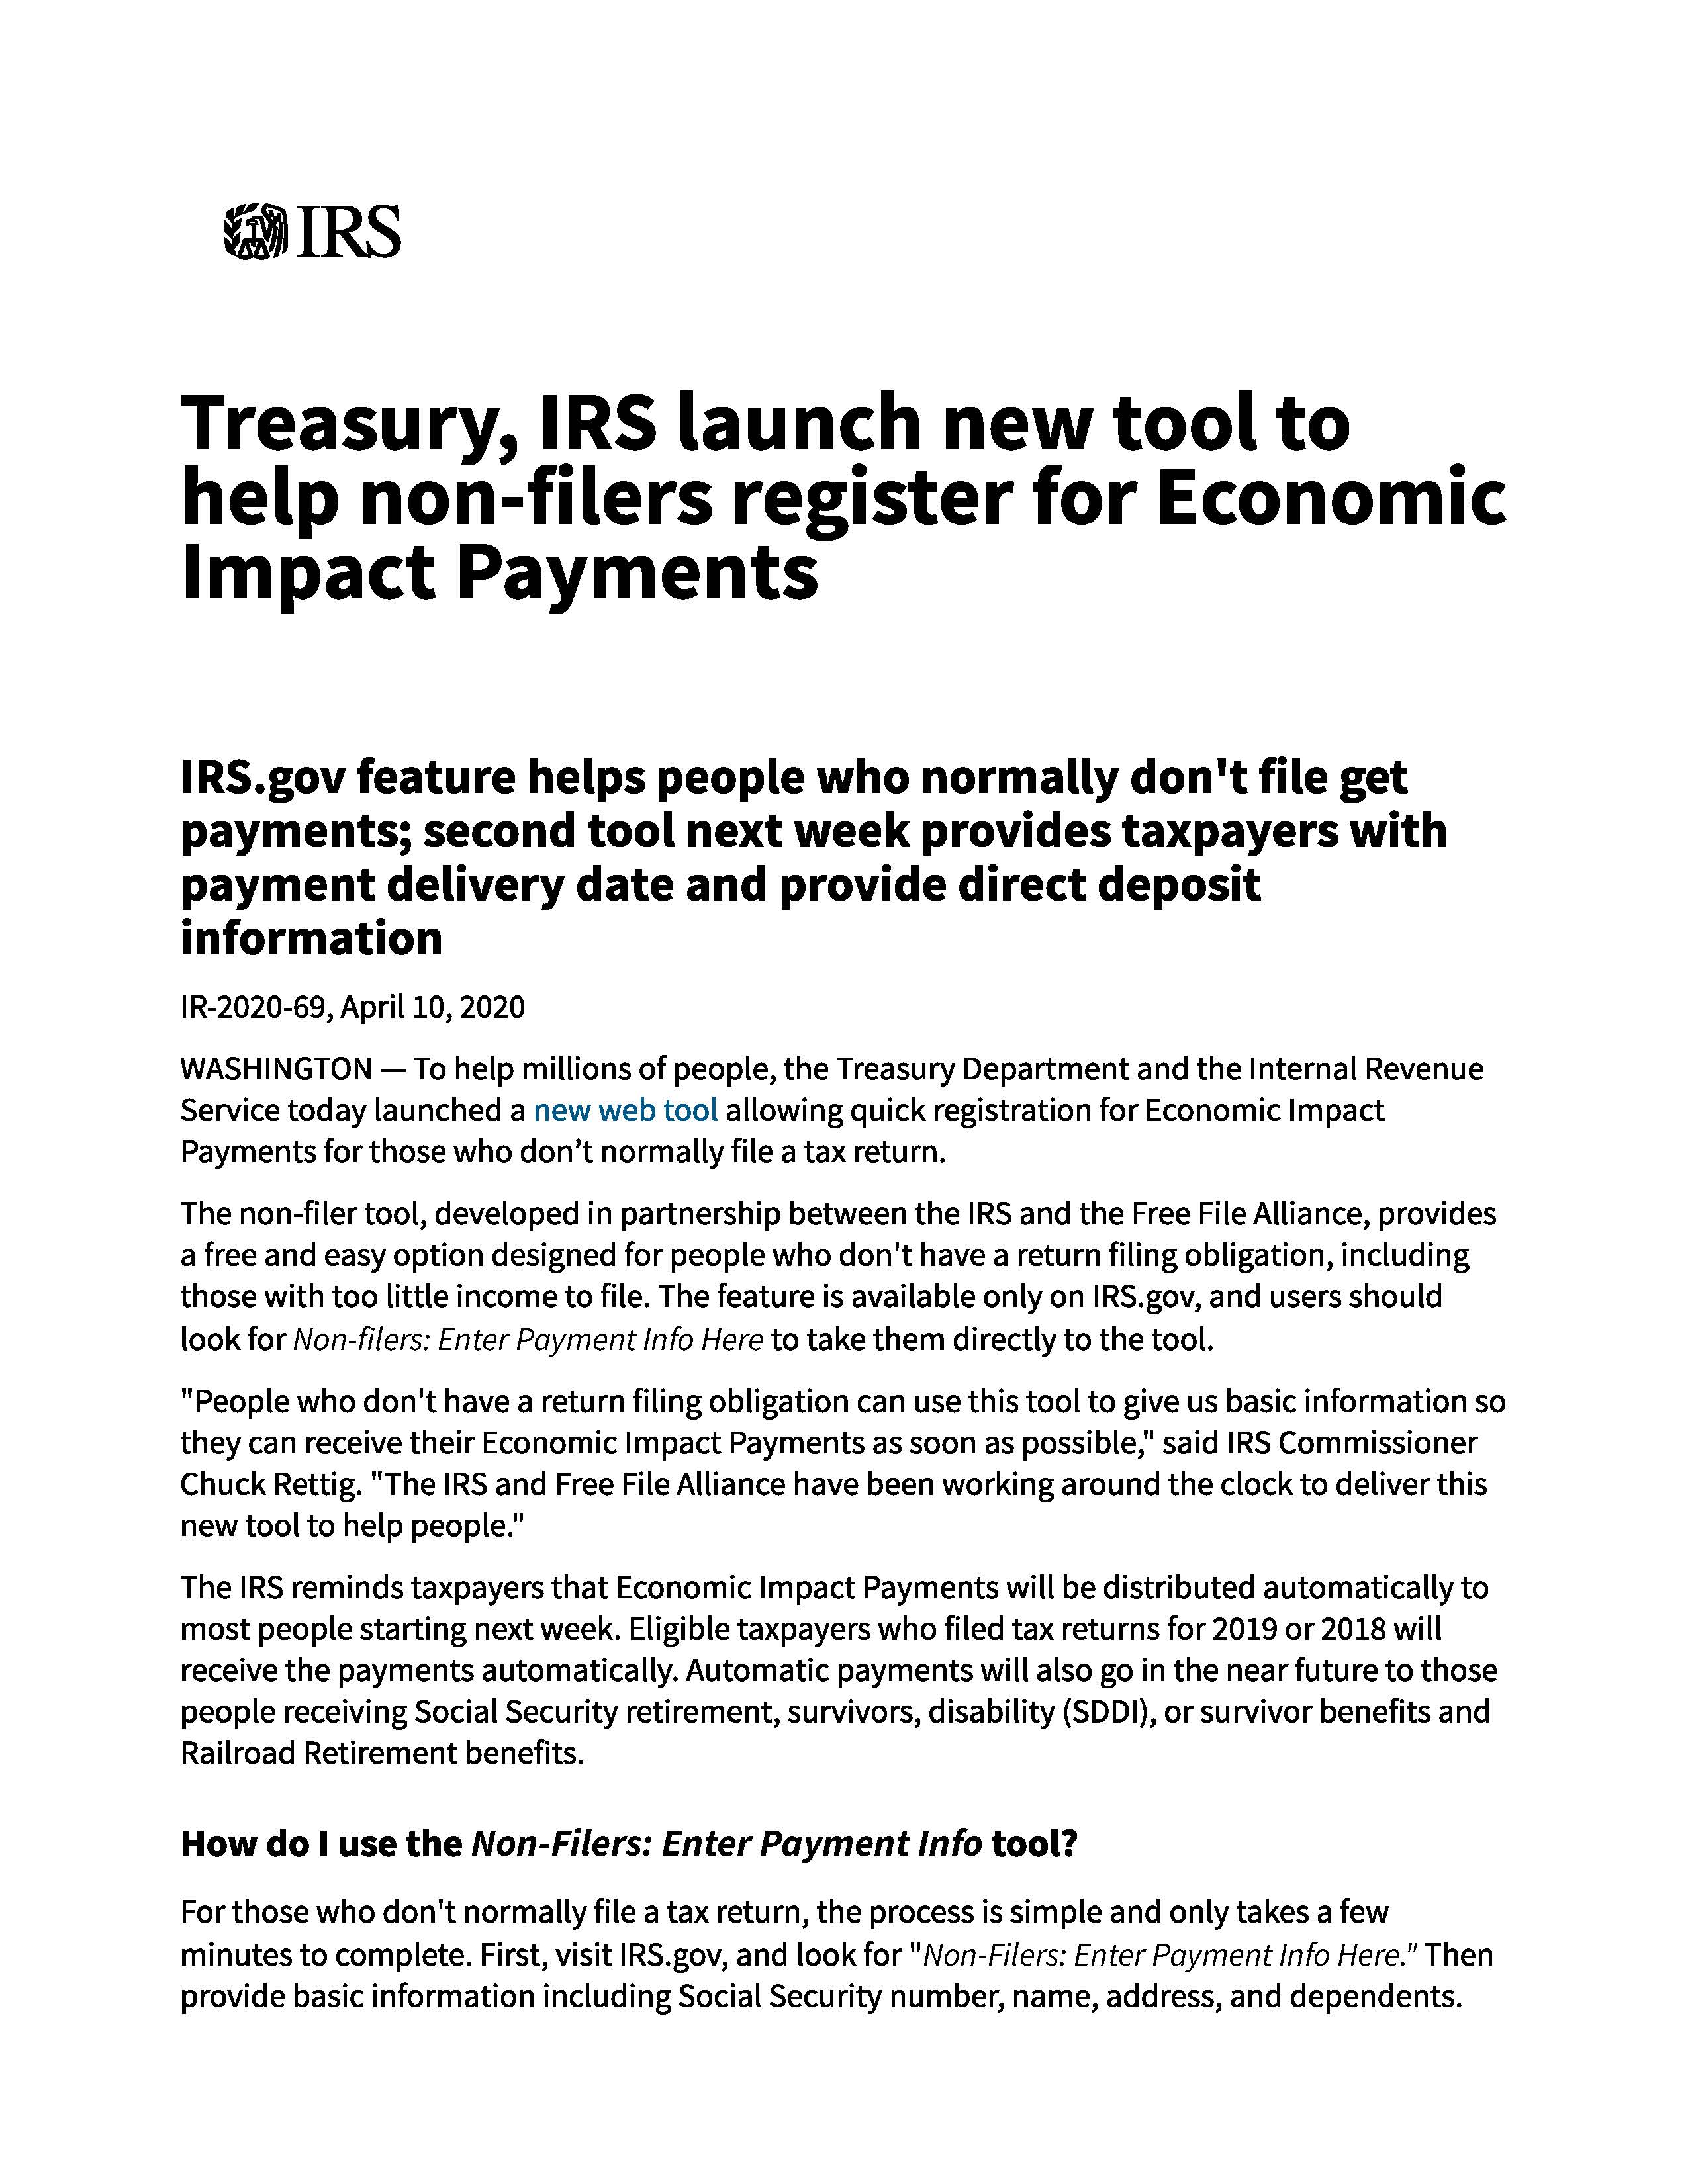 Treasury, IRS launch new tool to help non-filers register for Economic Impact Payments